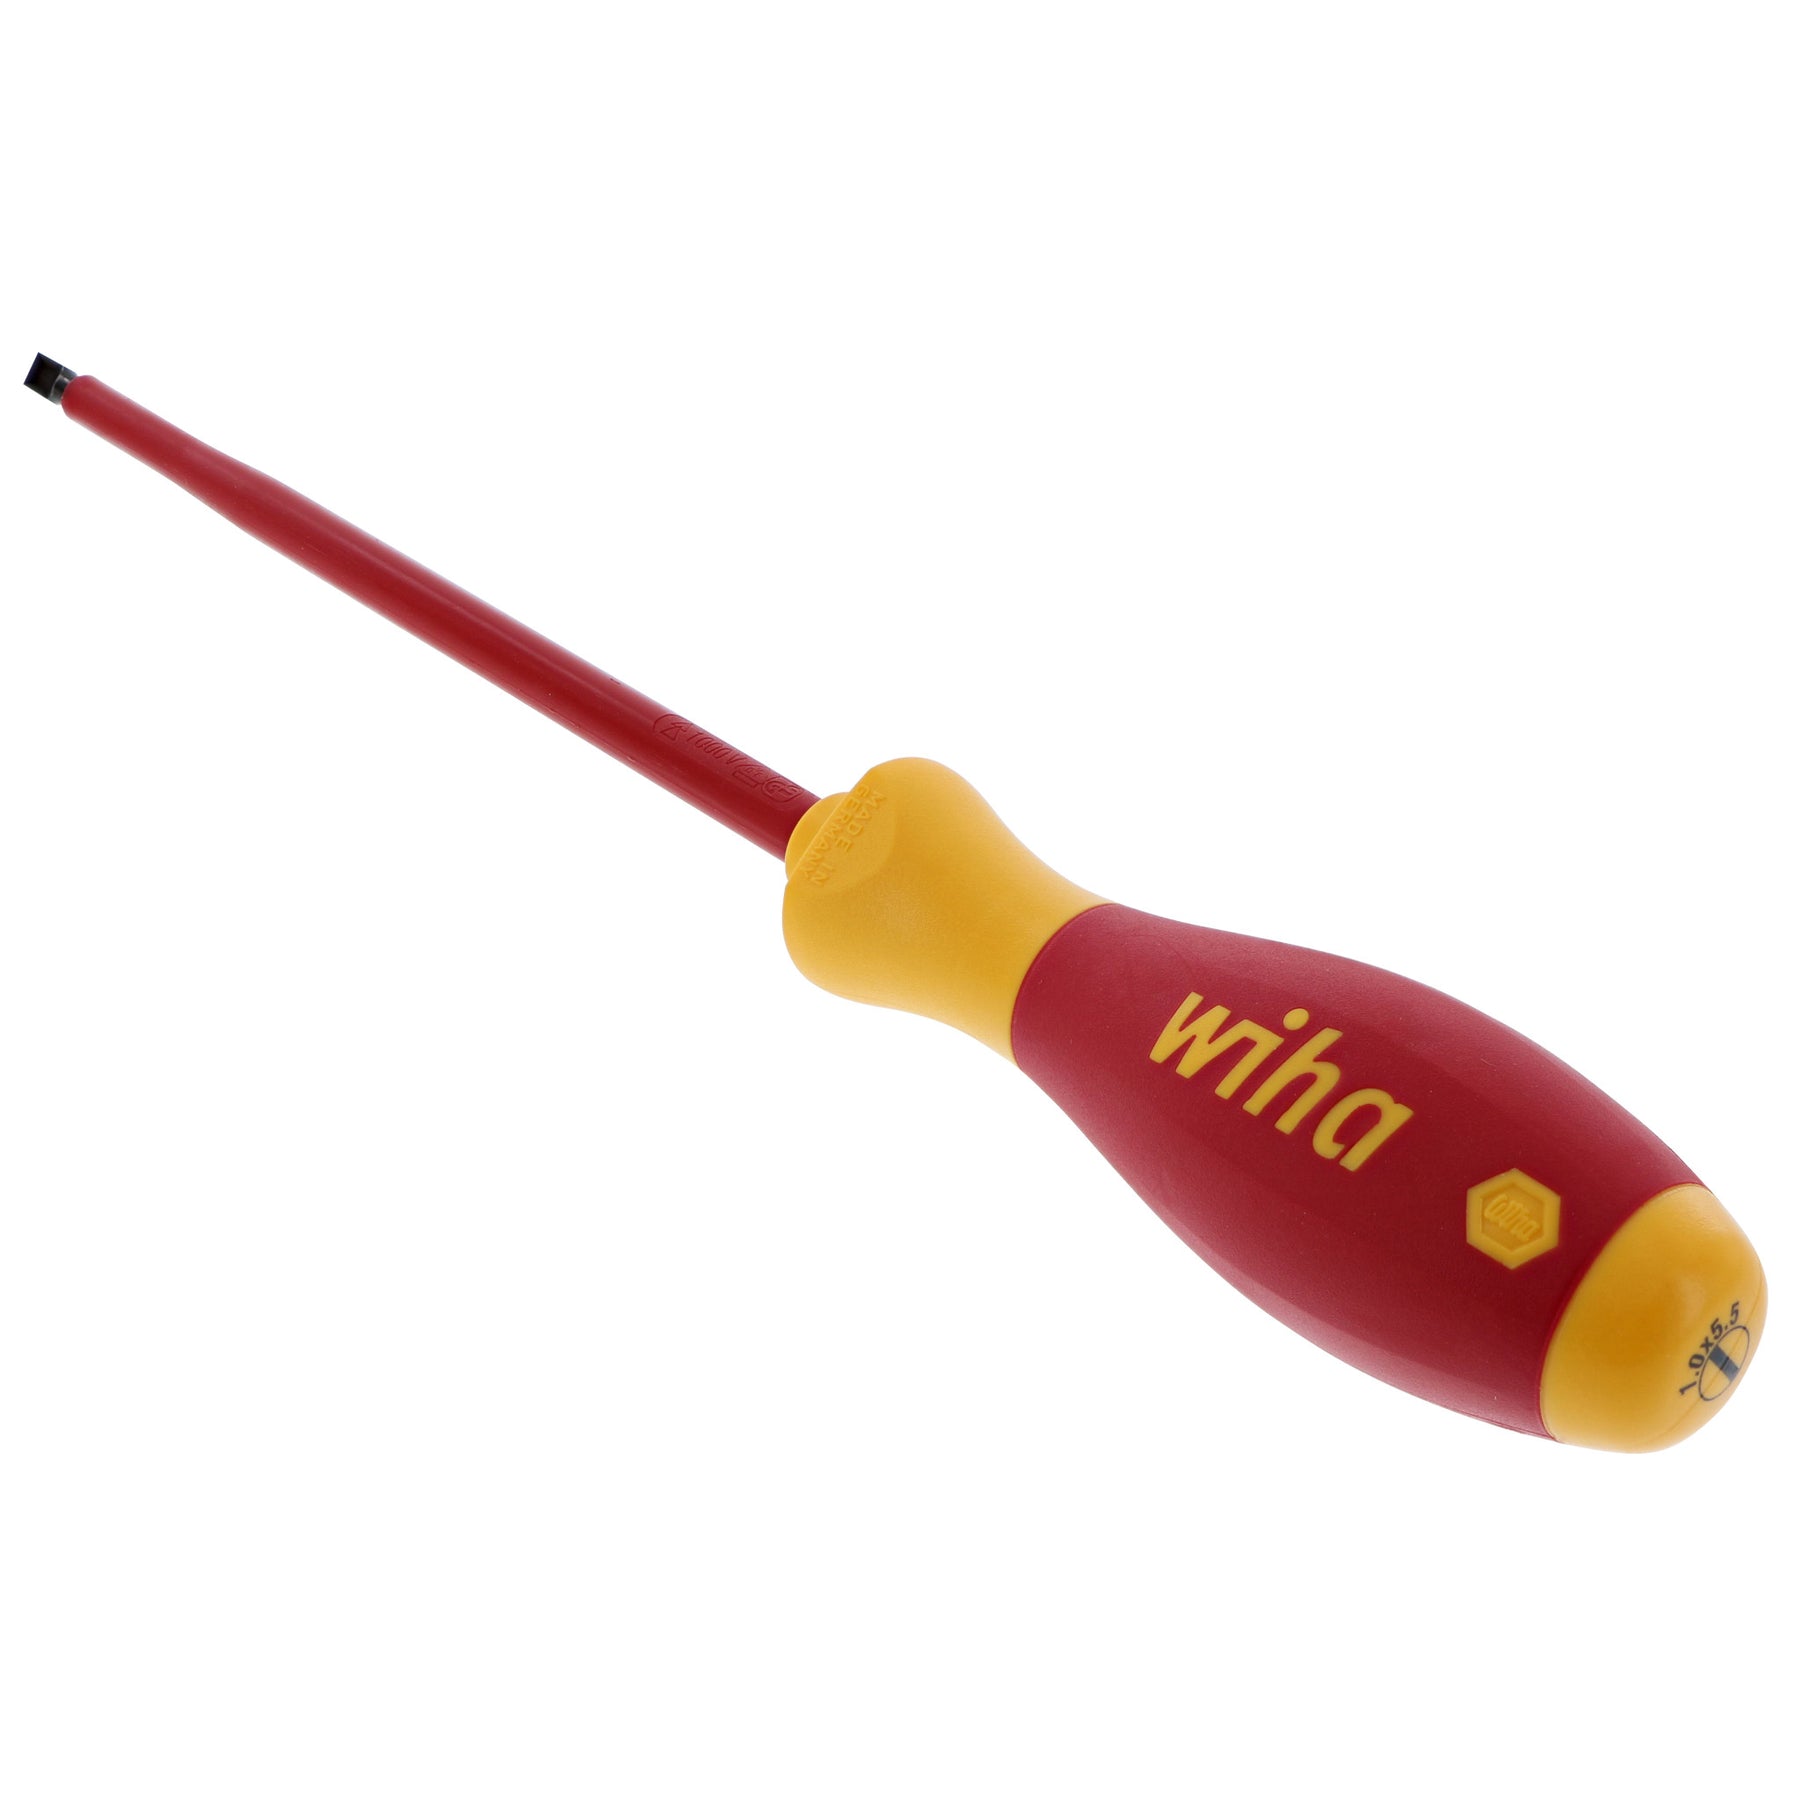 Wiha Tools 32026 Insulated Slotted Screwdriver 5.5 x 175mm